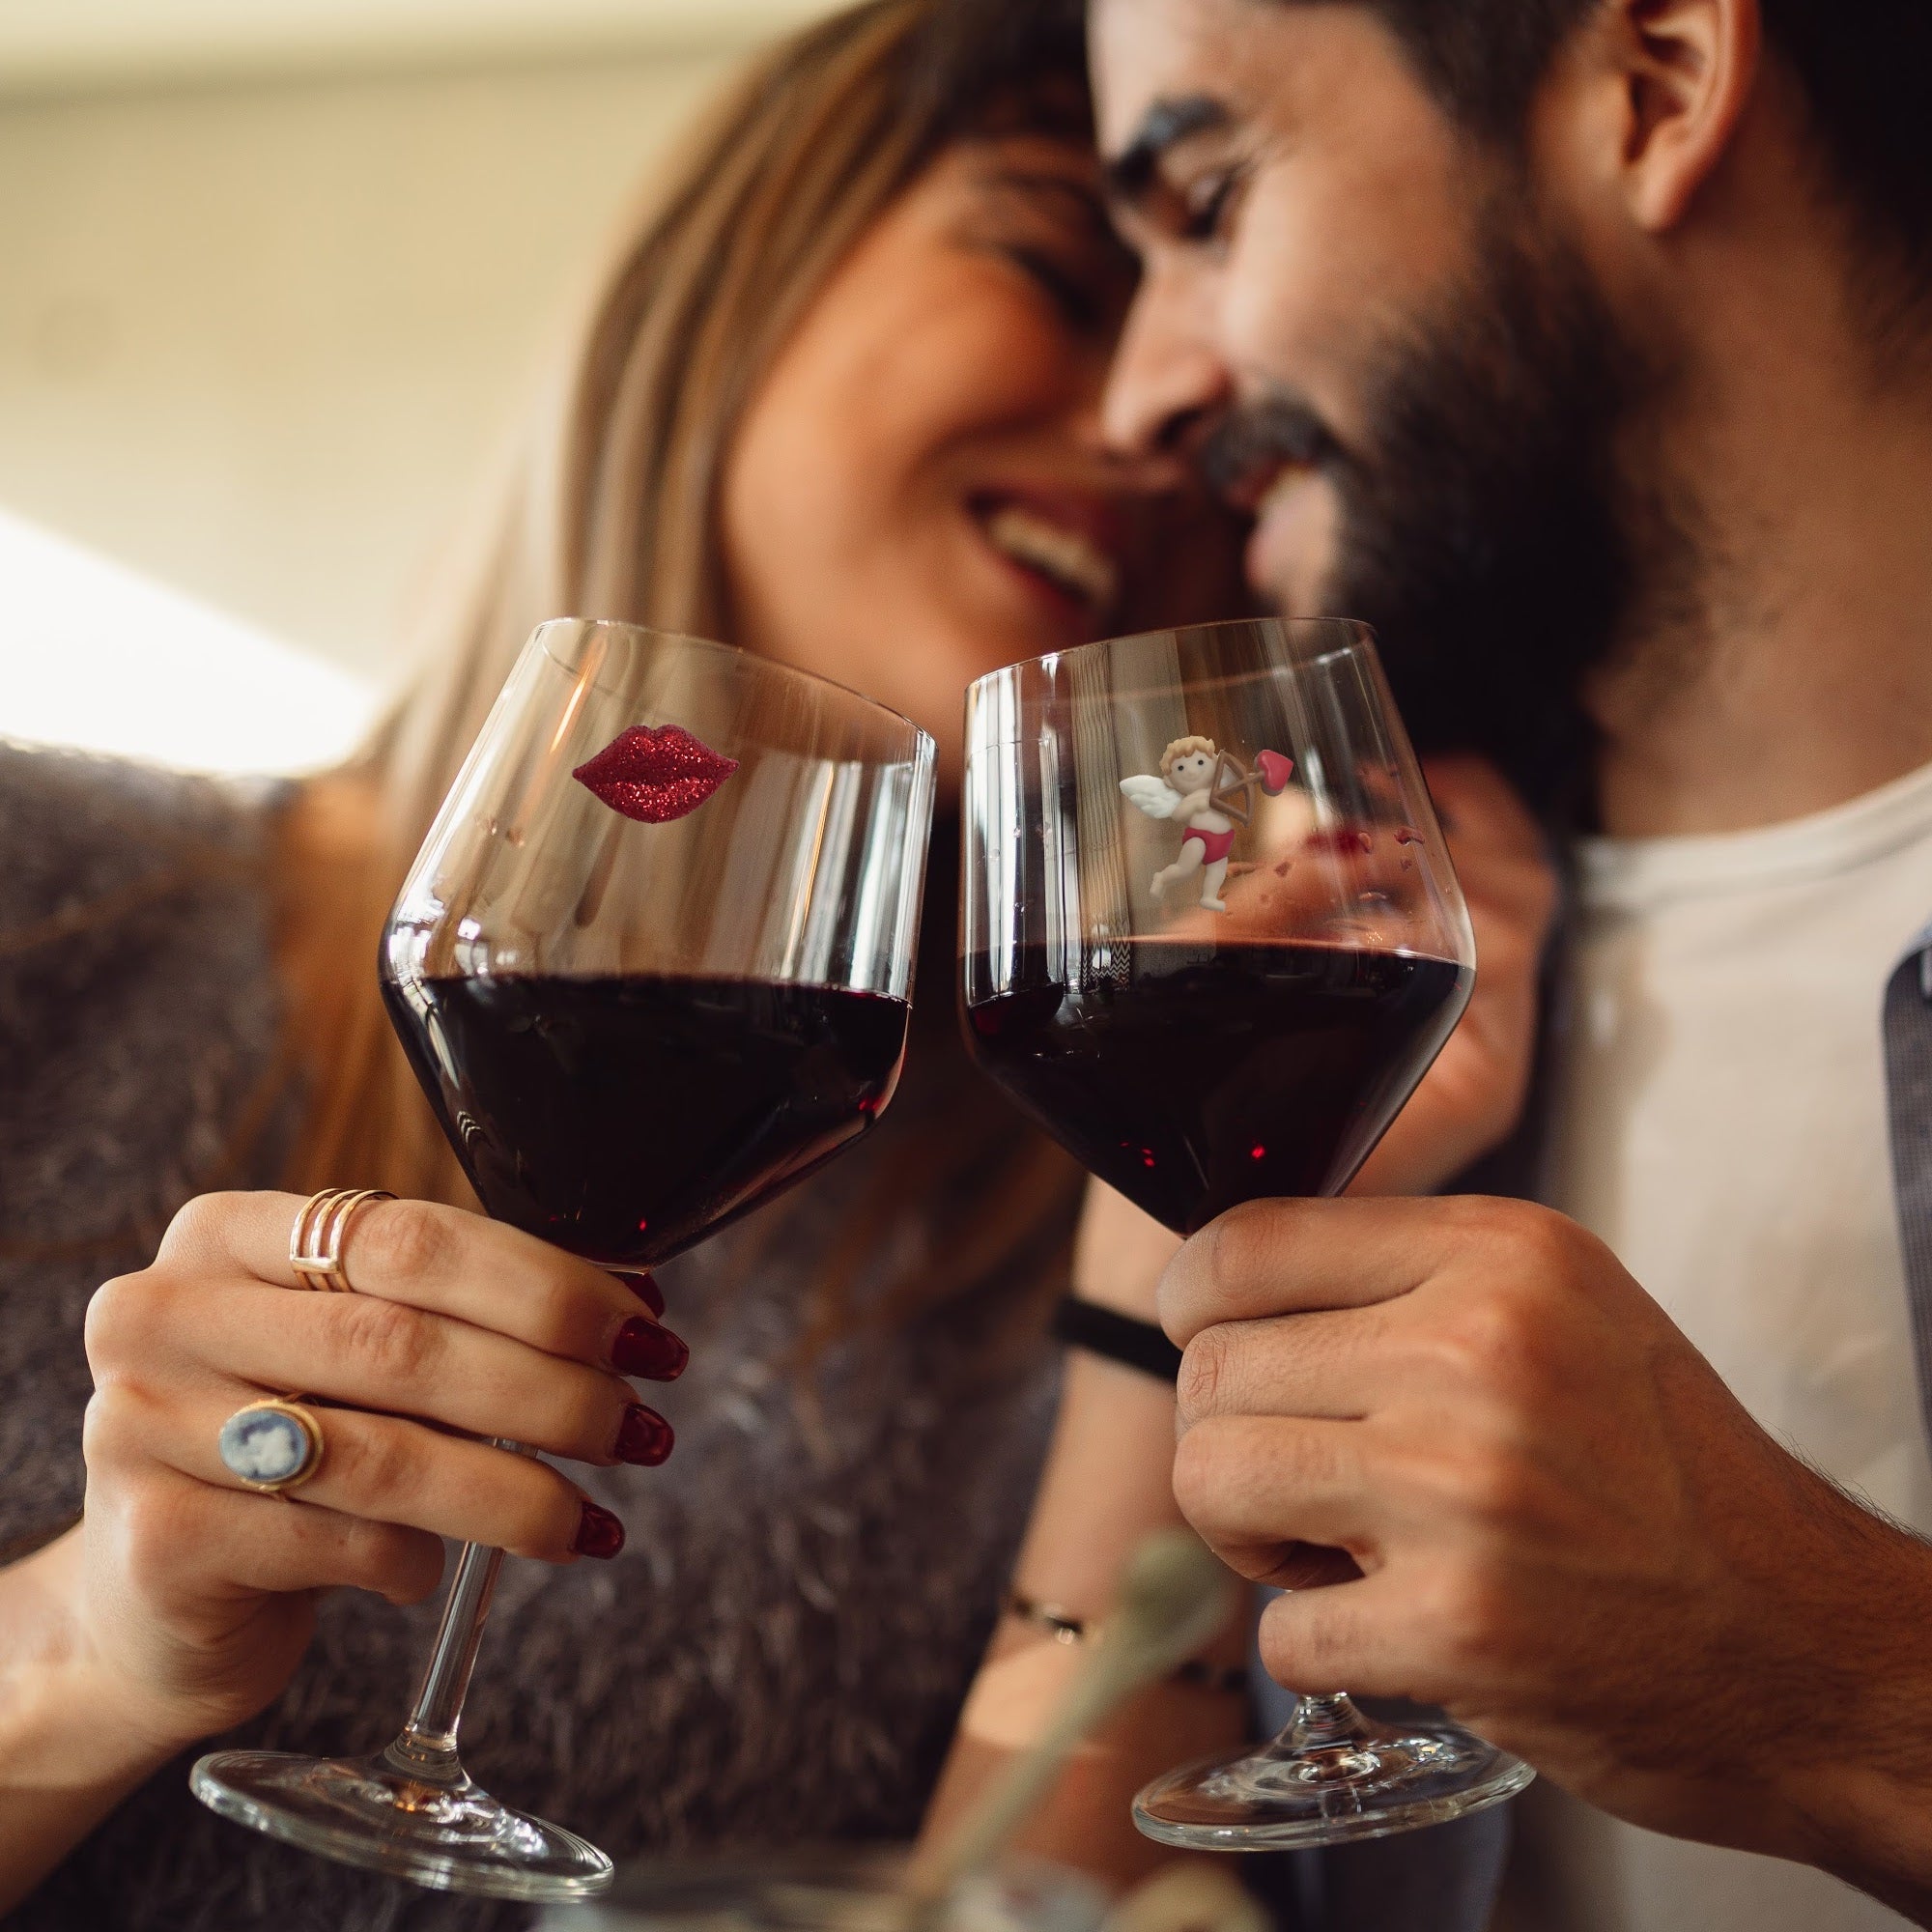 Romantic Stay-At-Home Date Night Ideas for Parents this Valentine's Day